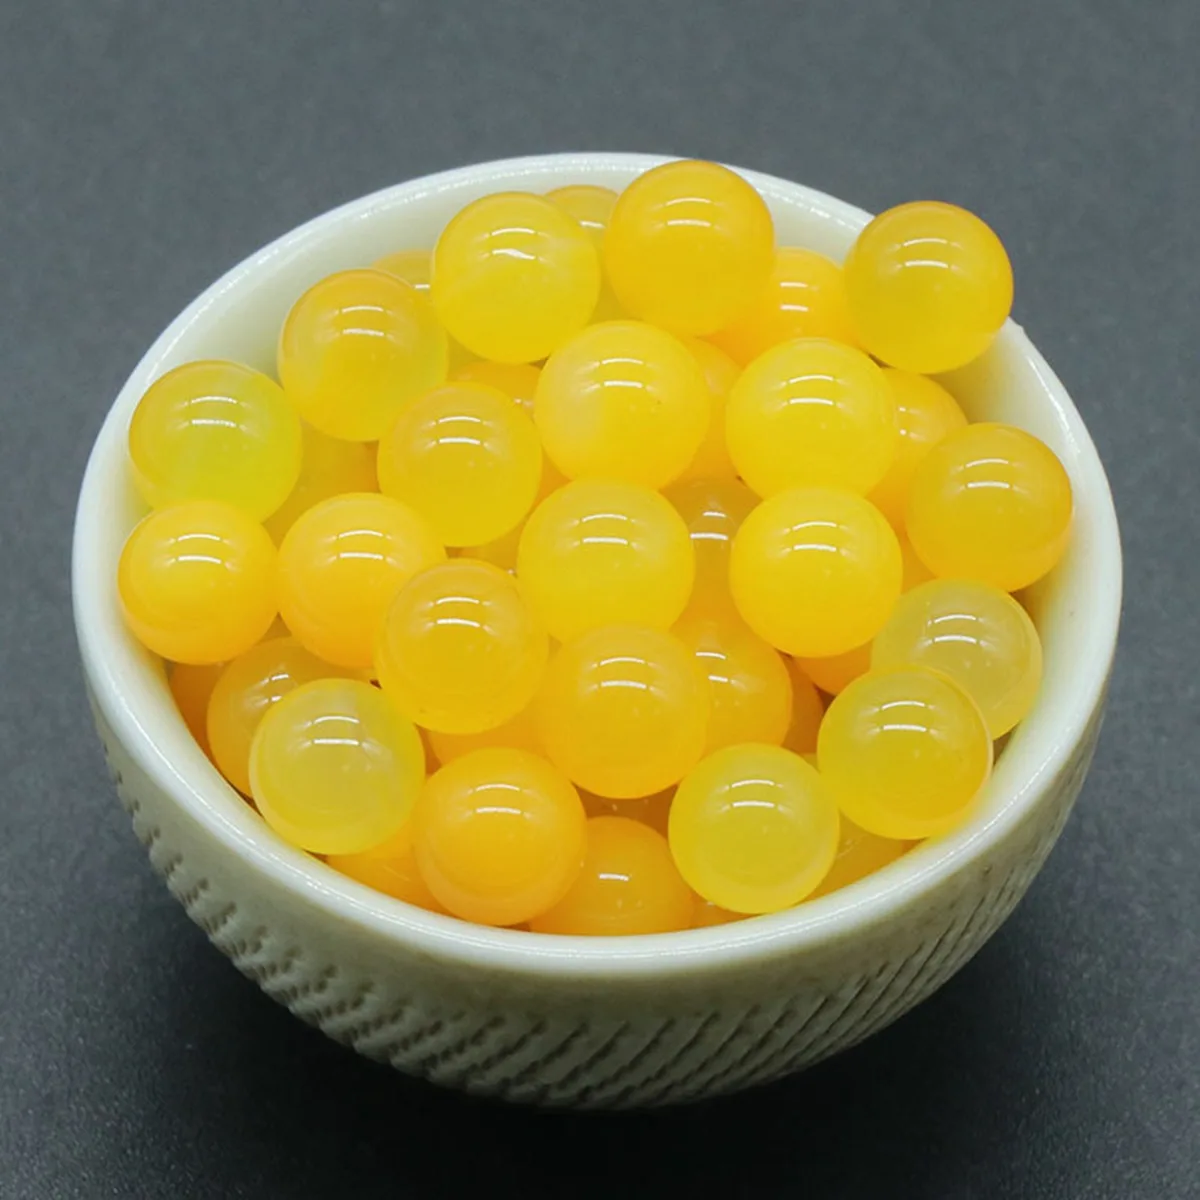 

8PCS 8MM Yellow Agate Round Beads for DIY Making Jewelry NO-Drilled Hole Loose Healing Cute Stone Crystal Sphere Balls